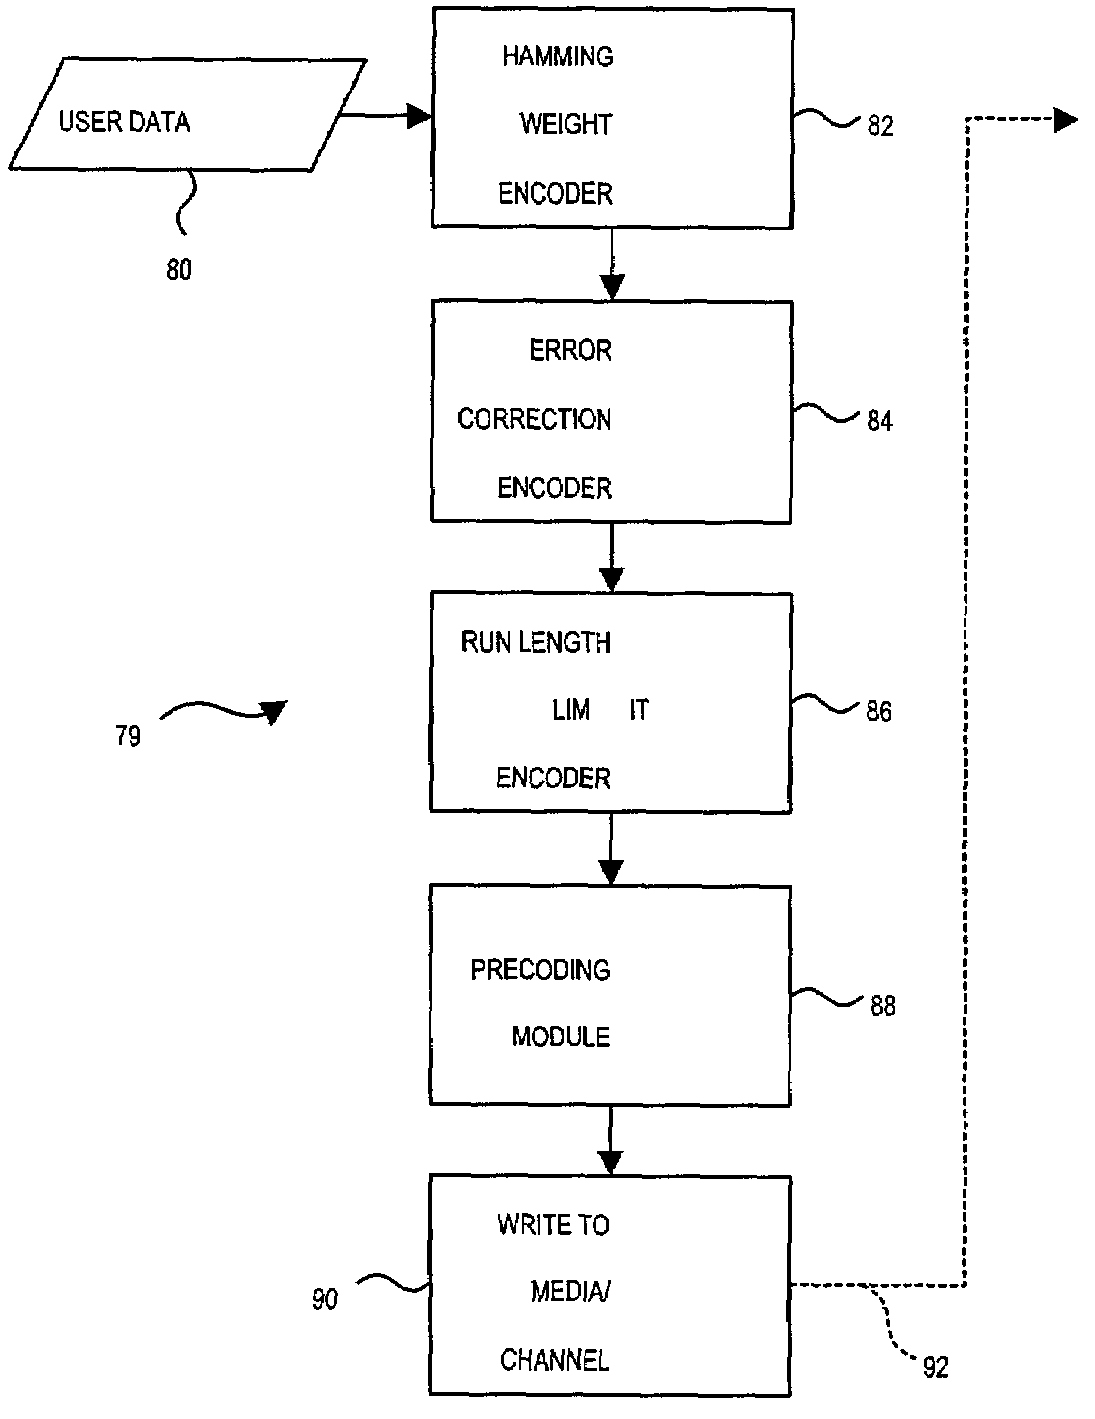 Encoding and decoding apparatus and method with hamming weight enhancement